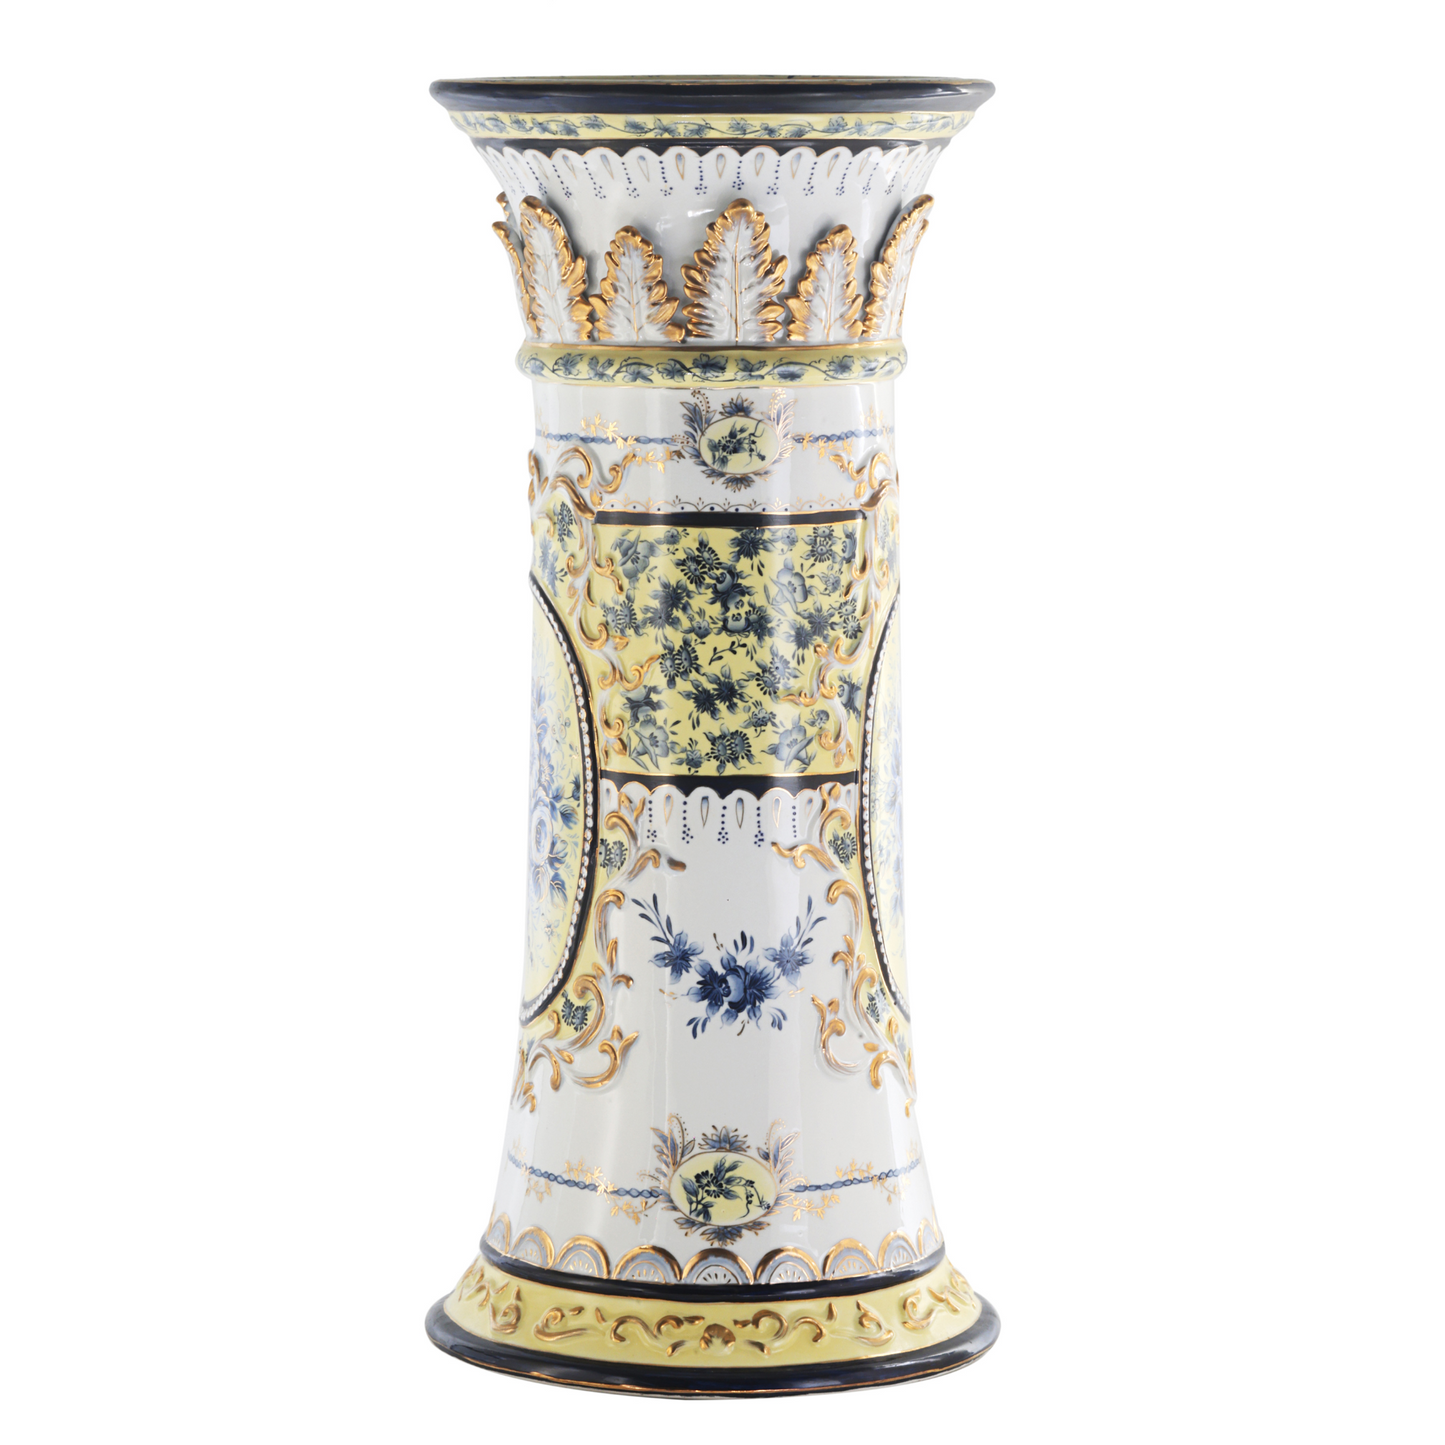 Hand-painted Baroque Style Flower Pot Pedestal in Gold Baroque Furniture